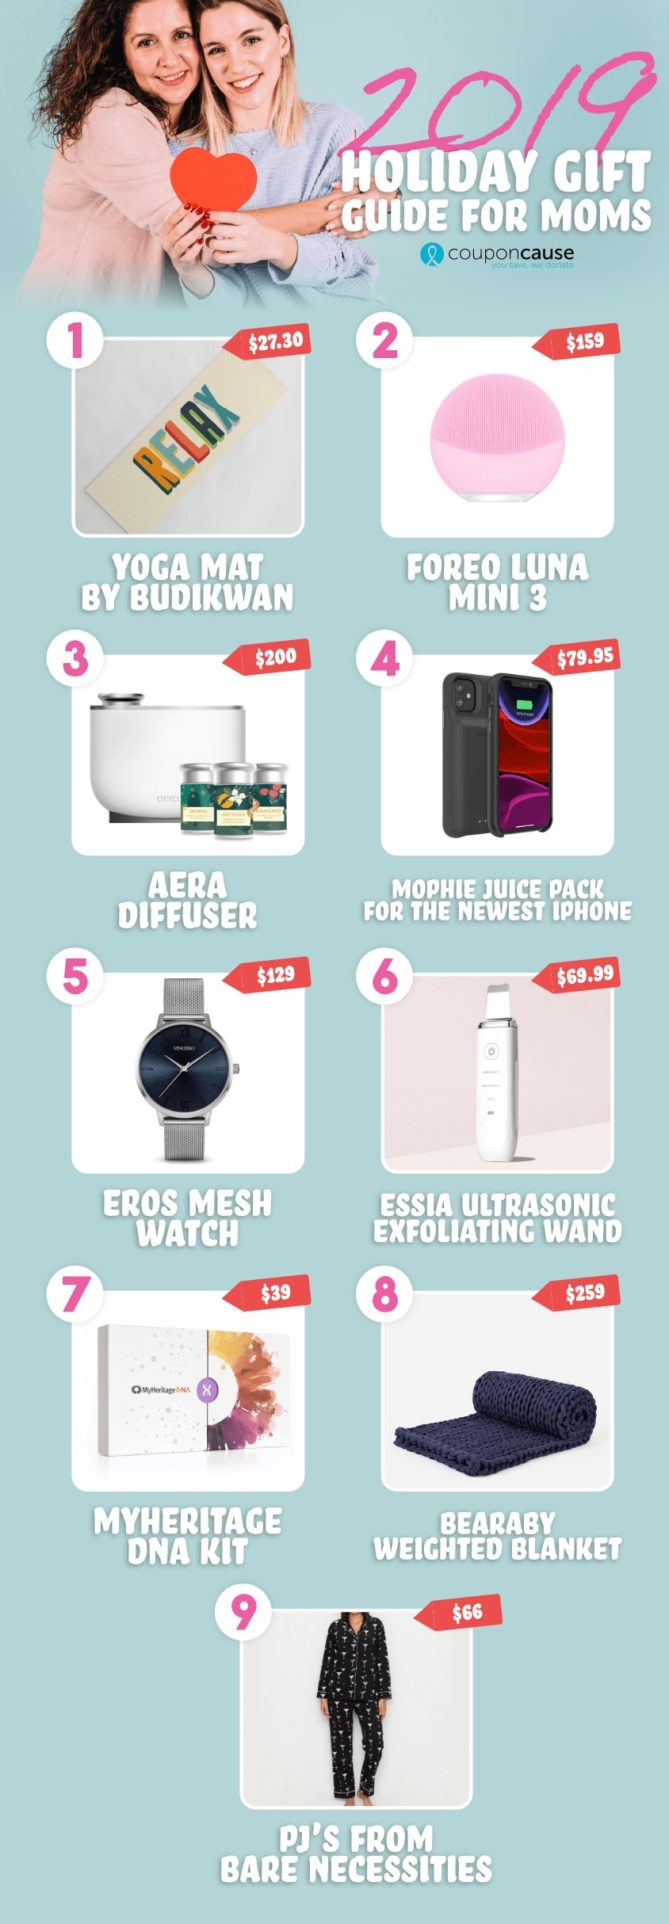 CouponCause Holiday Gift Guide for Moms 2019